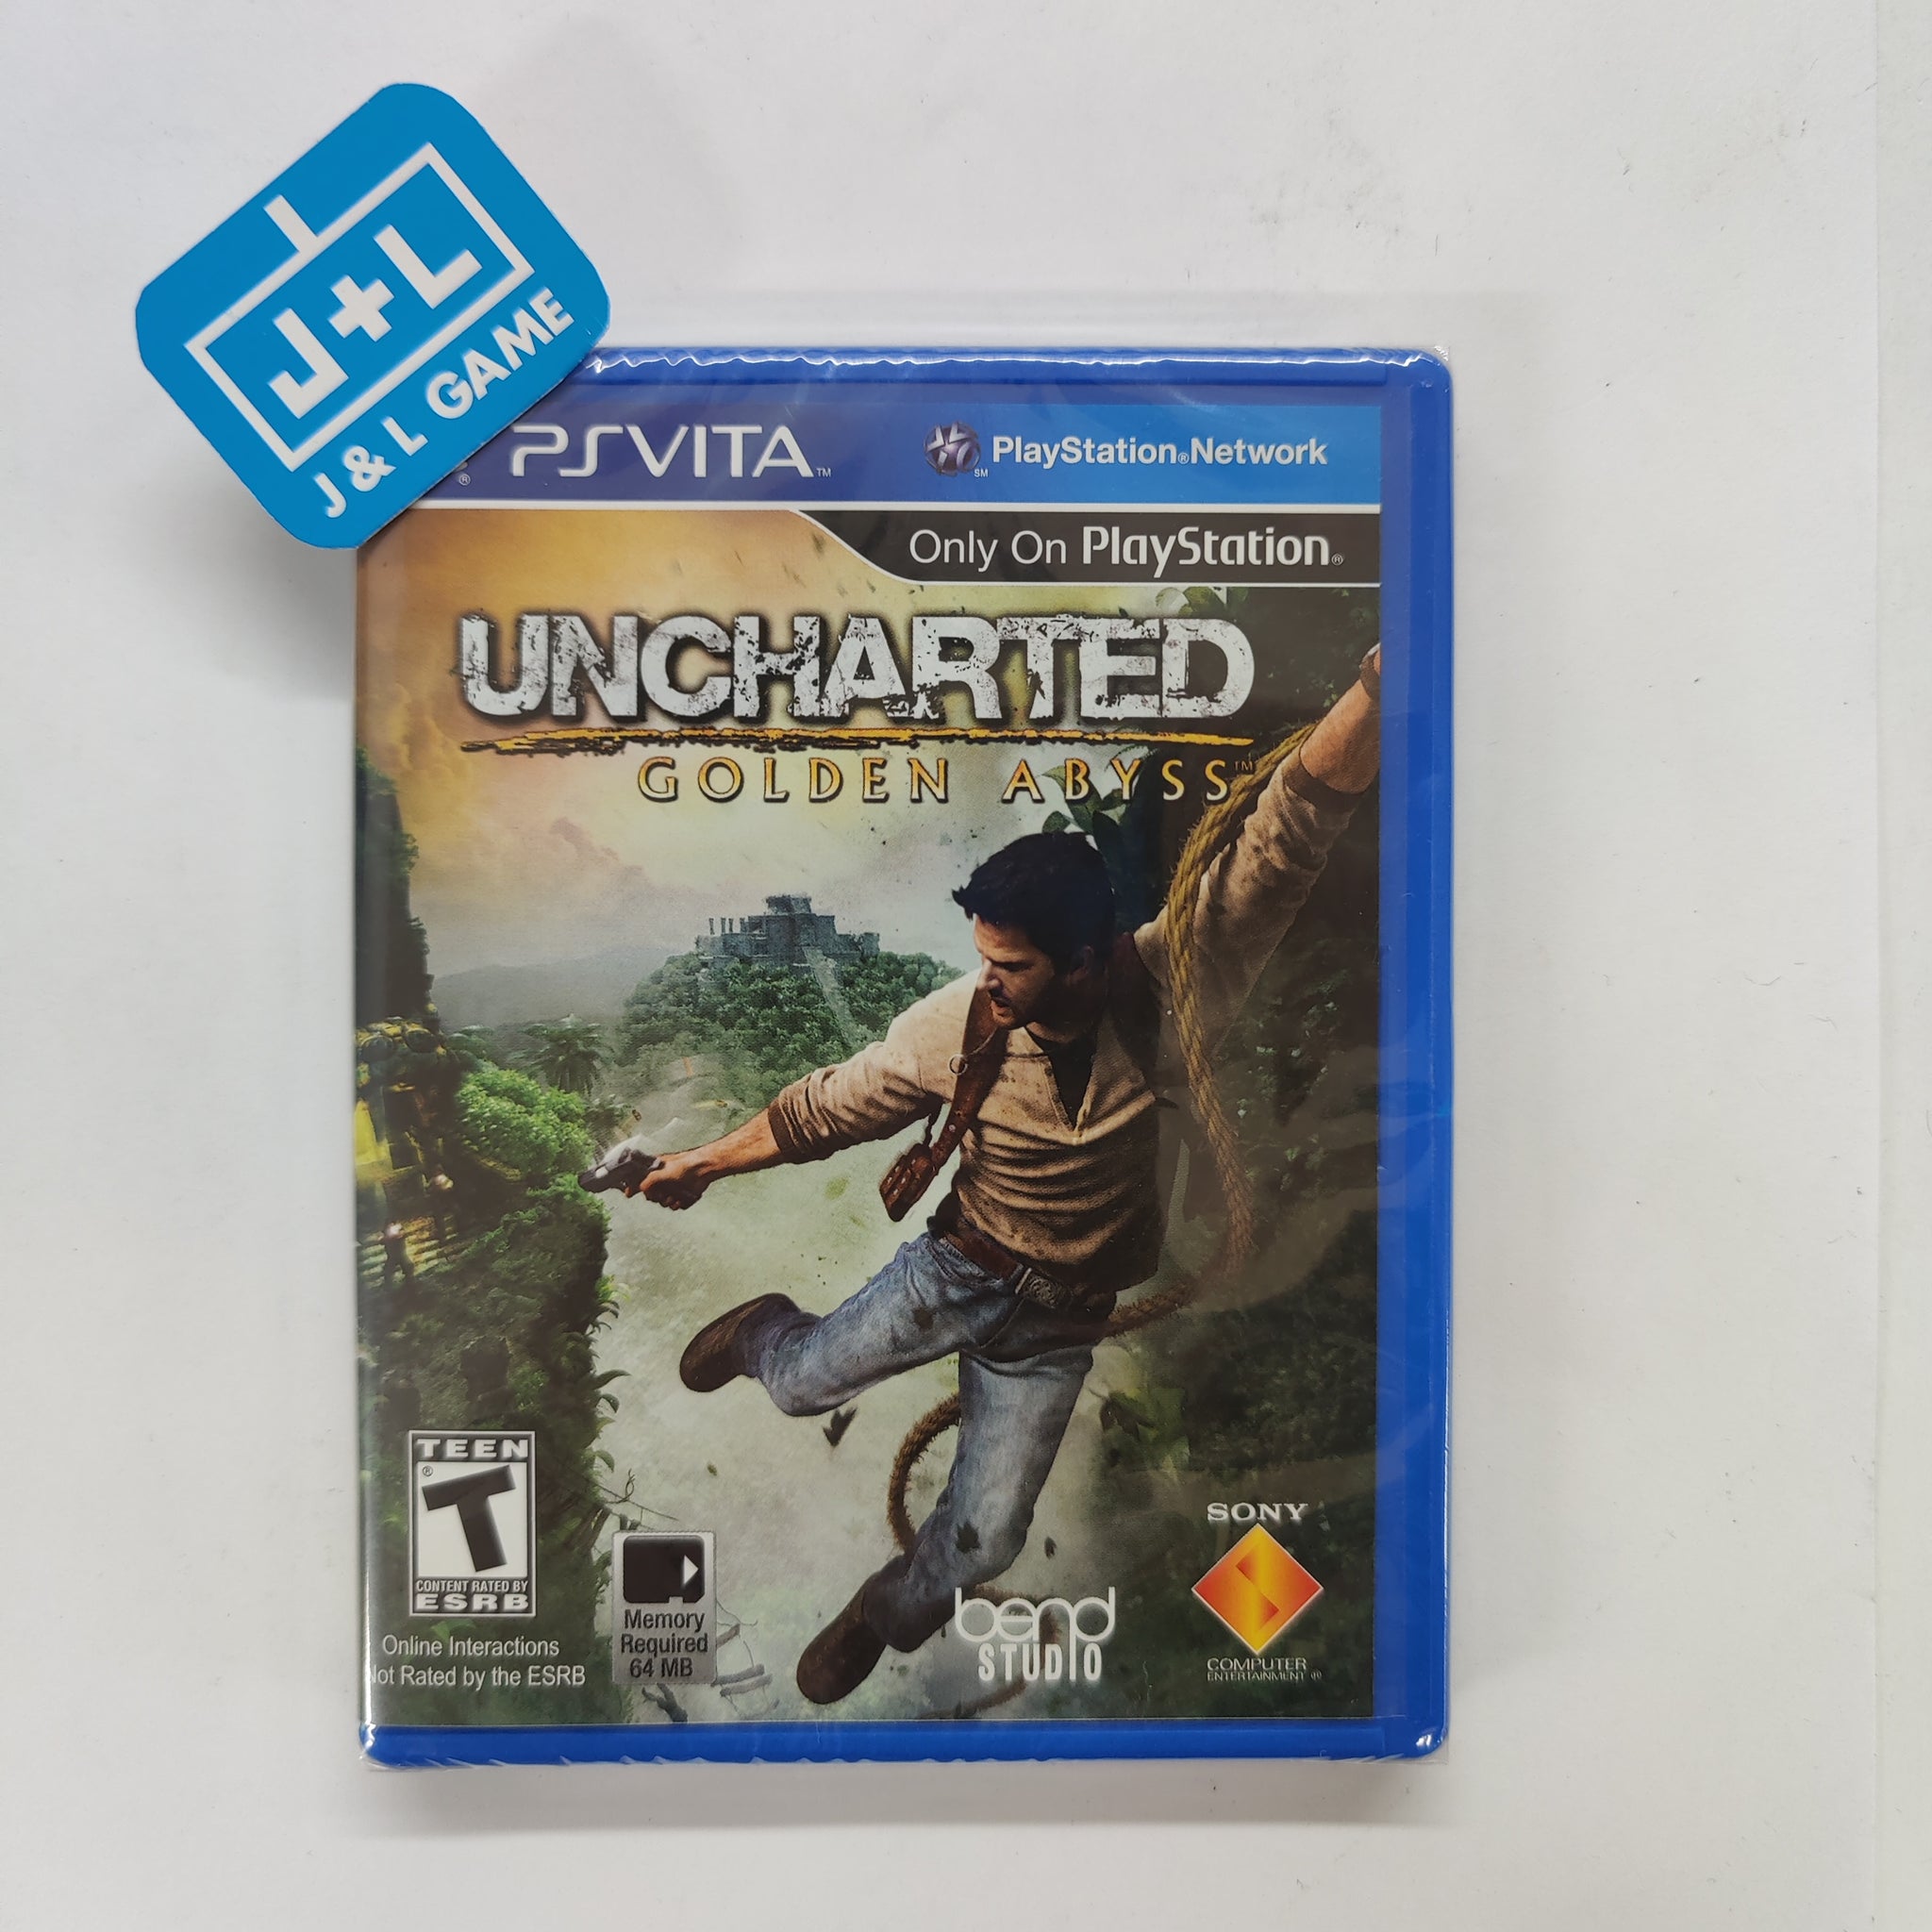 Uncharted Golden Abyss Playstation Vita J L Video Games New York City